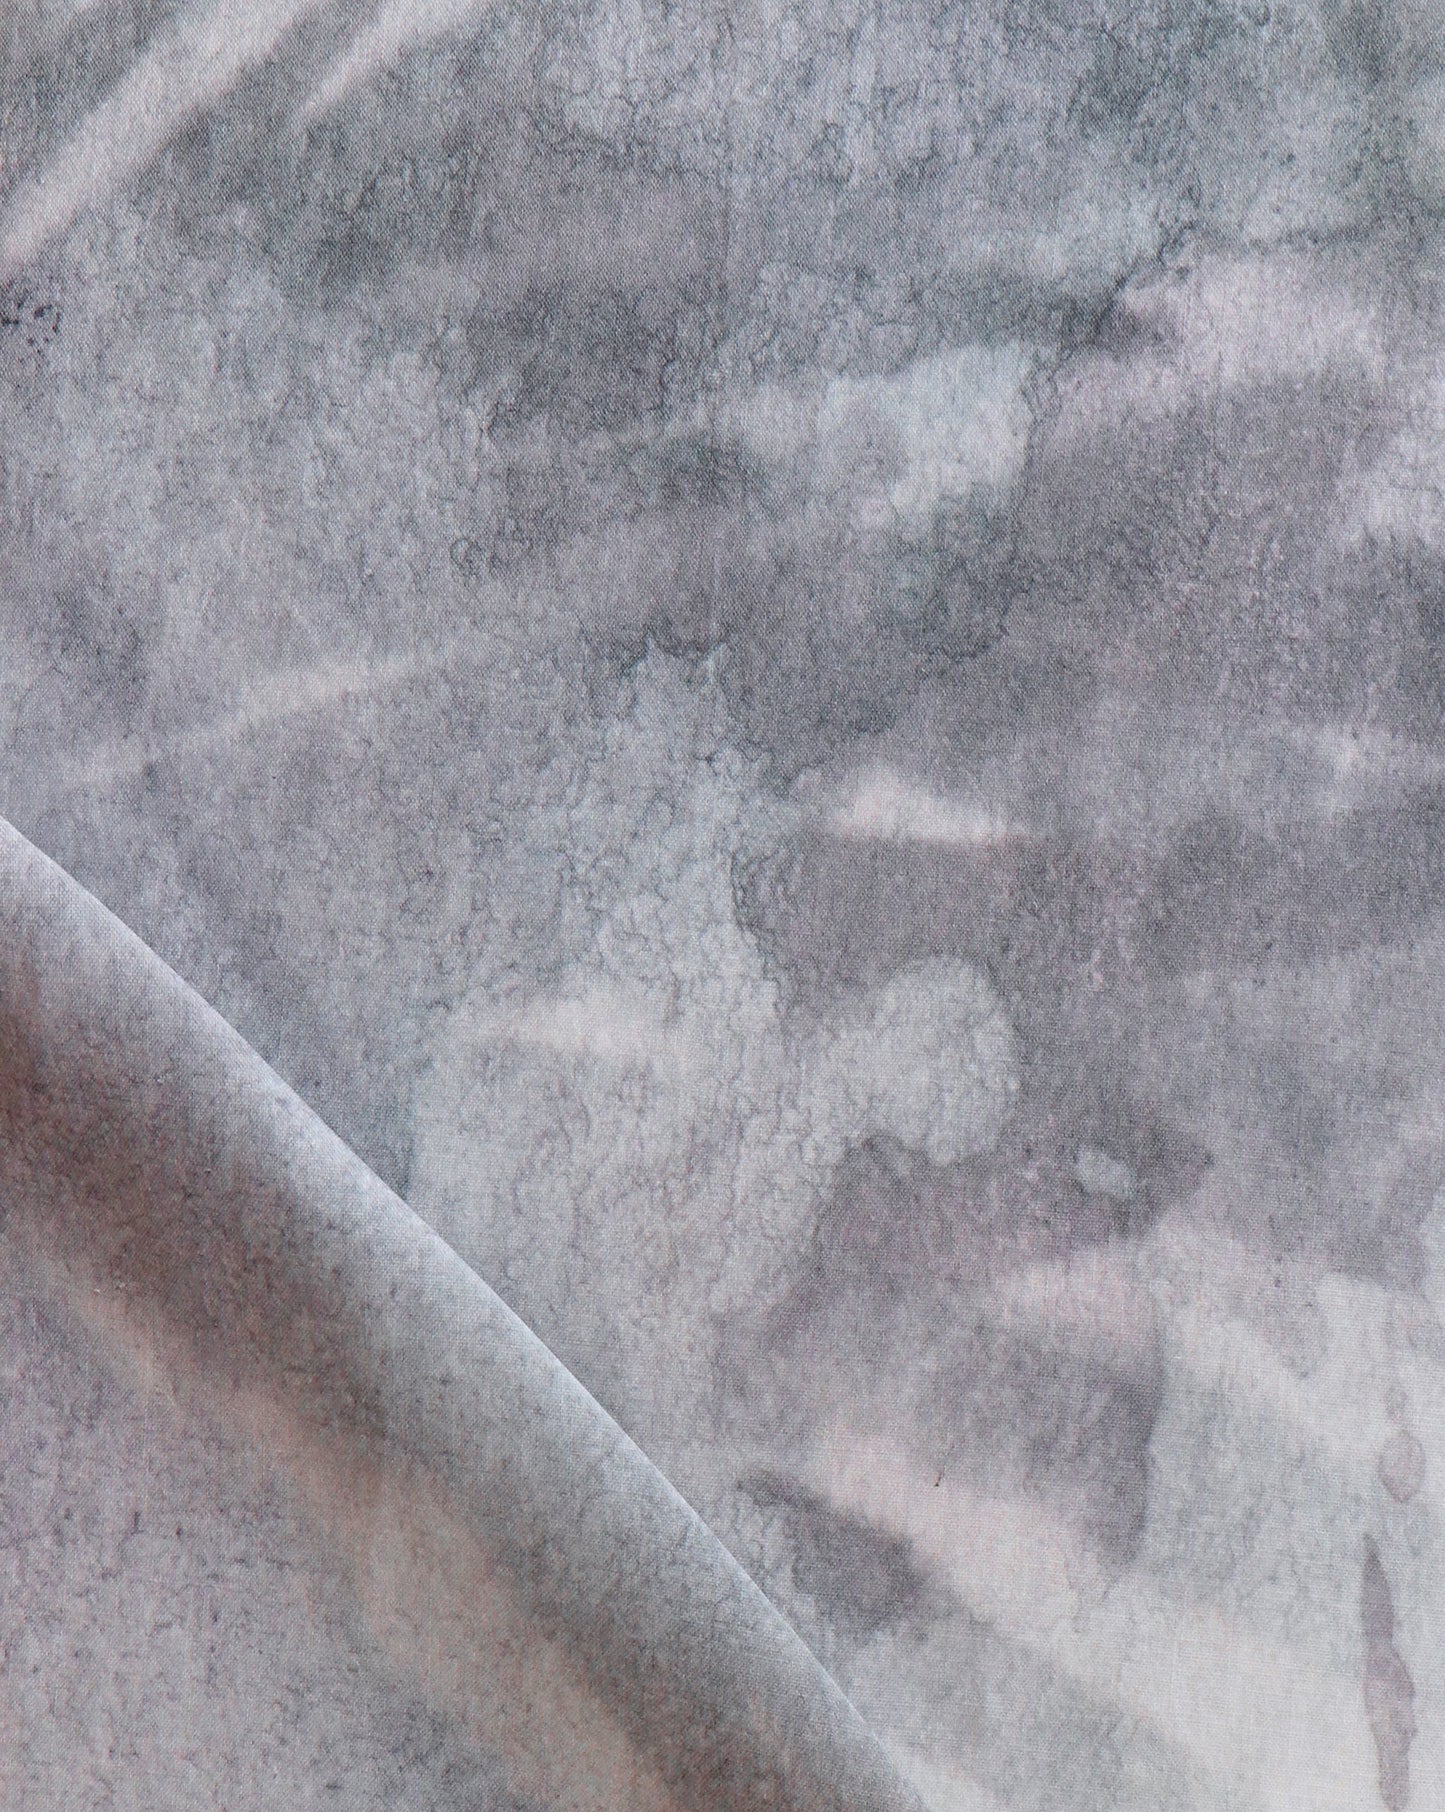 A close up of the Reflettere Fabric||Notte in a moody colorway.